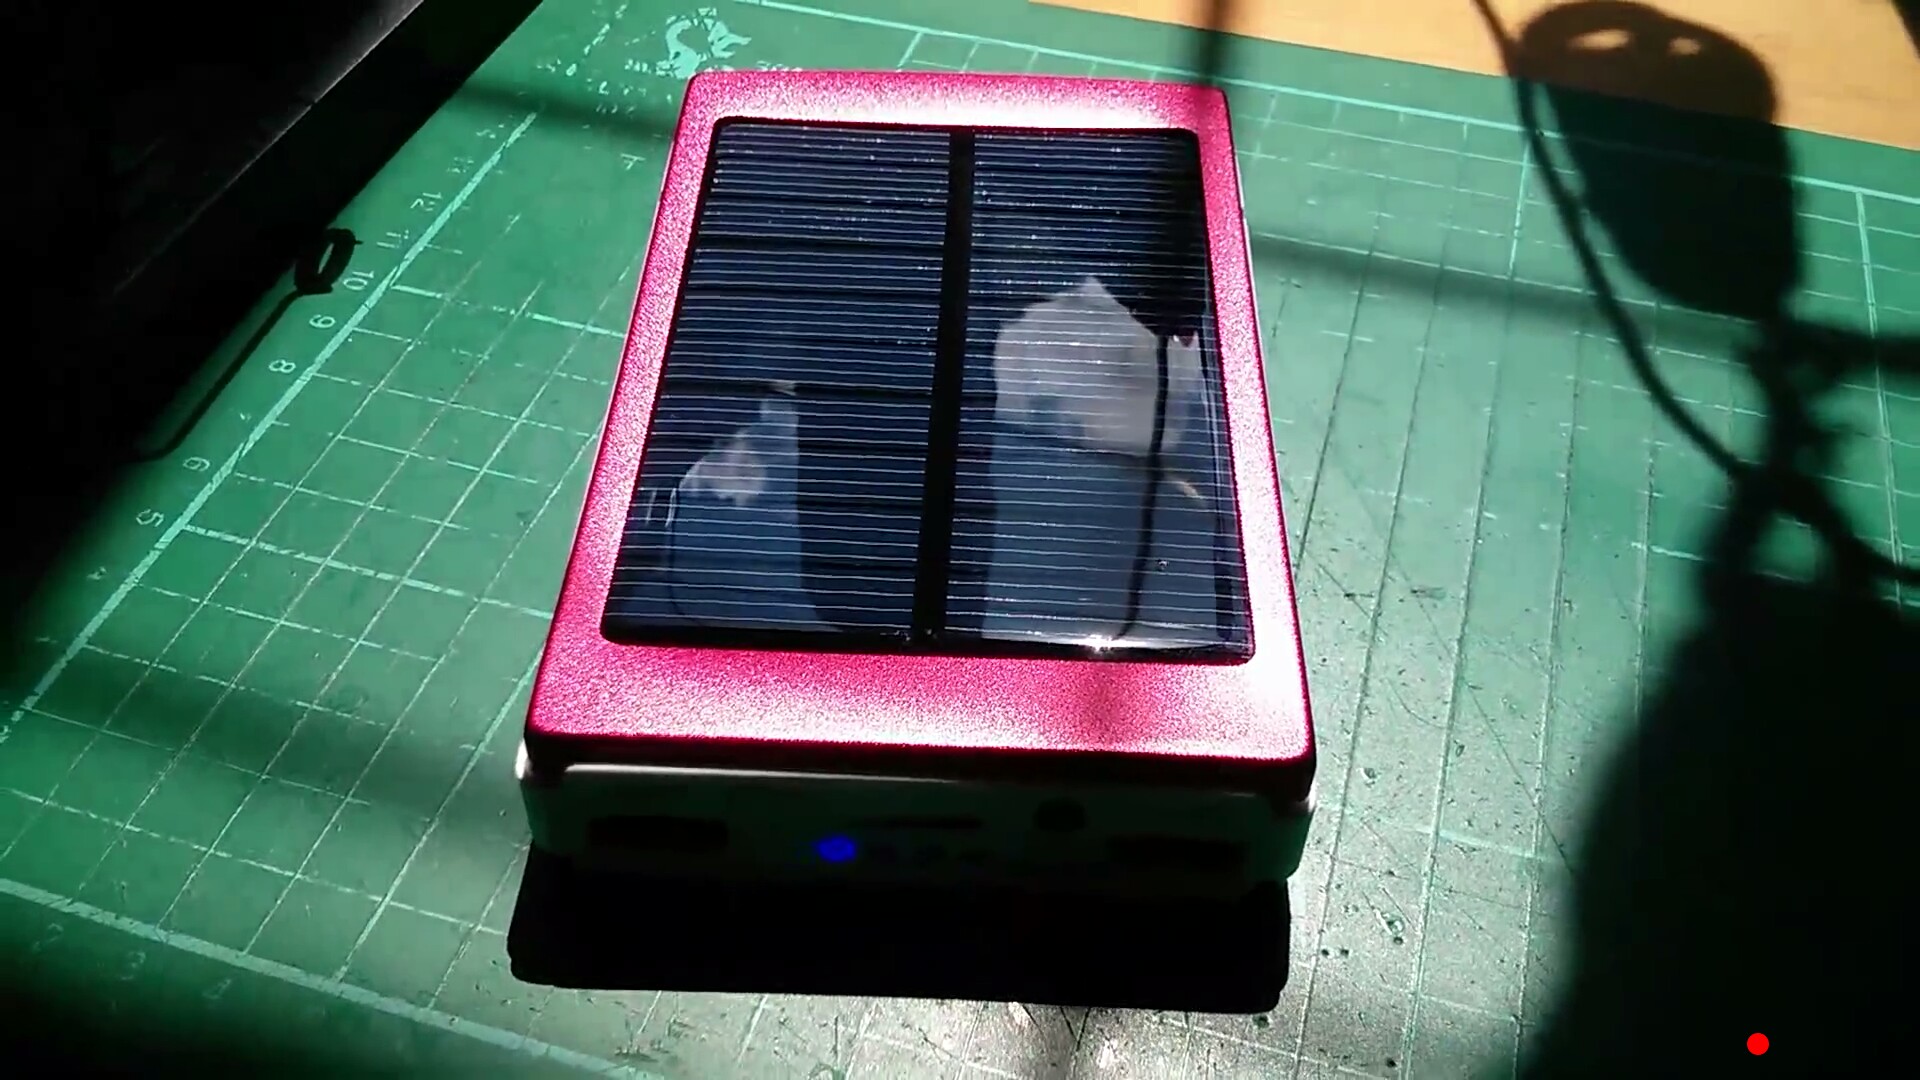 Please Read This Before You Buy A "30000mah Solar Power Bank"